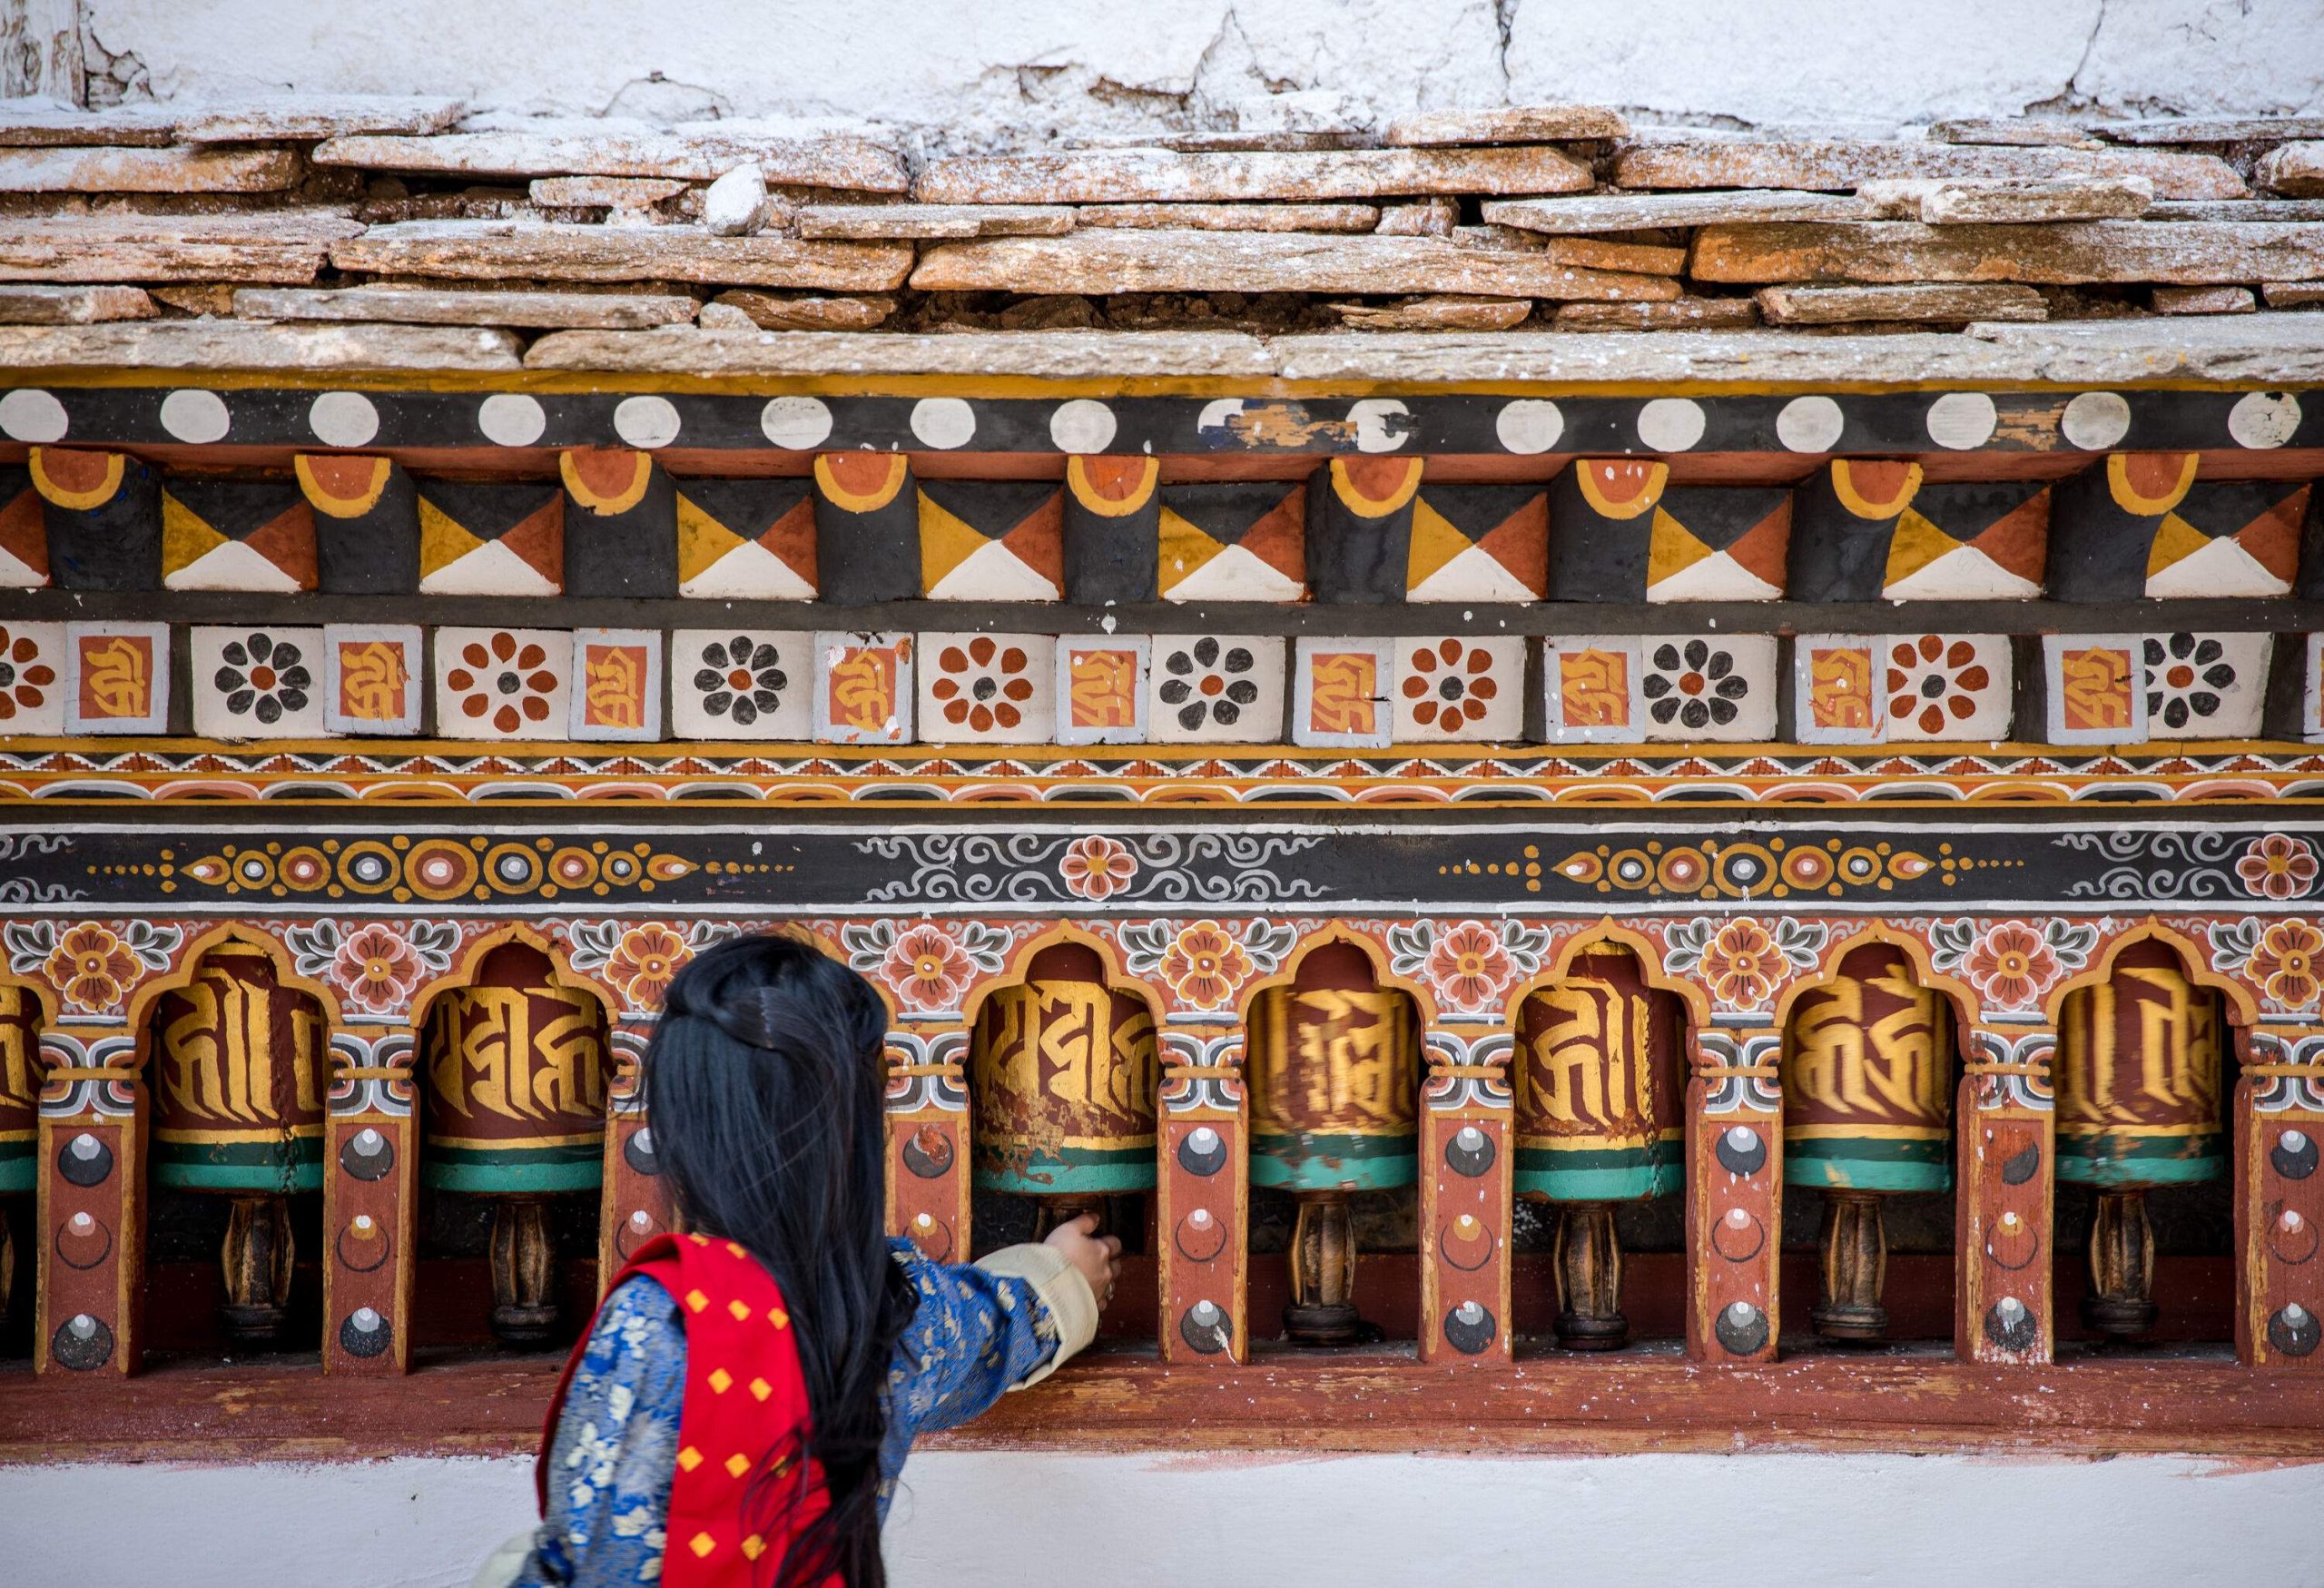 Gracefully adorned in a traditional Bhutanese dress called Kira, a woman delicately reaches out to touch one of the exquisitely painted, multi-coloured Bhutan prayer bells.